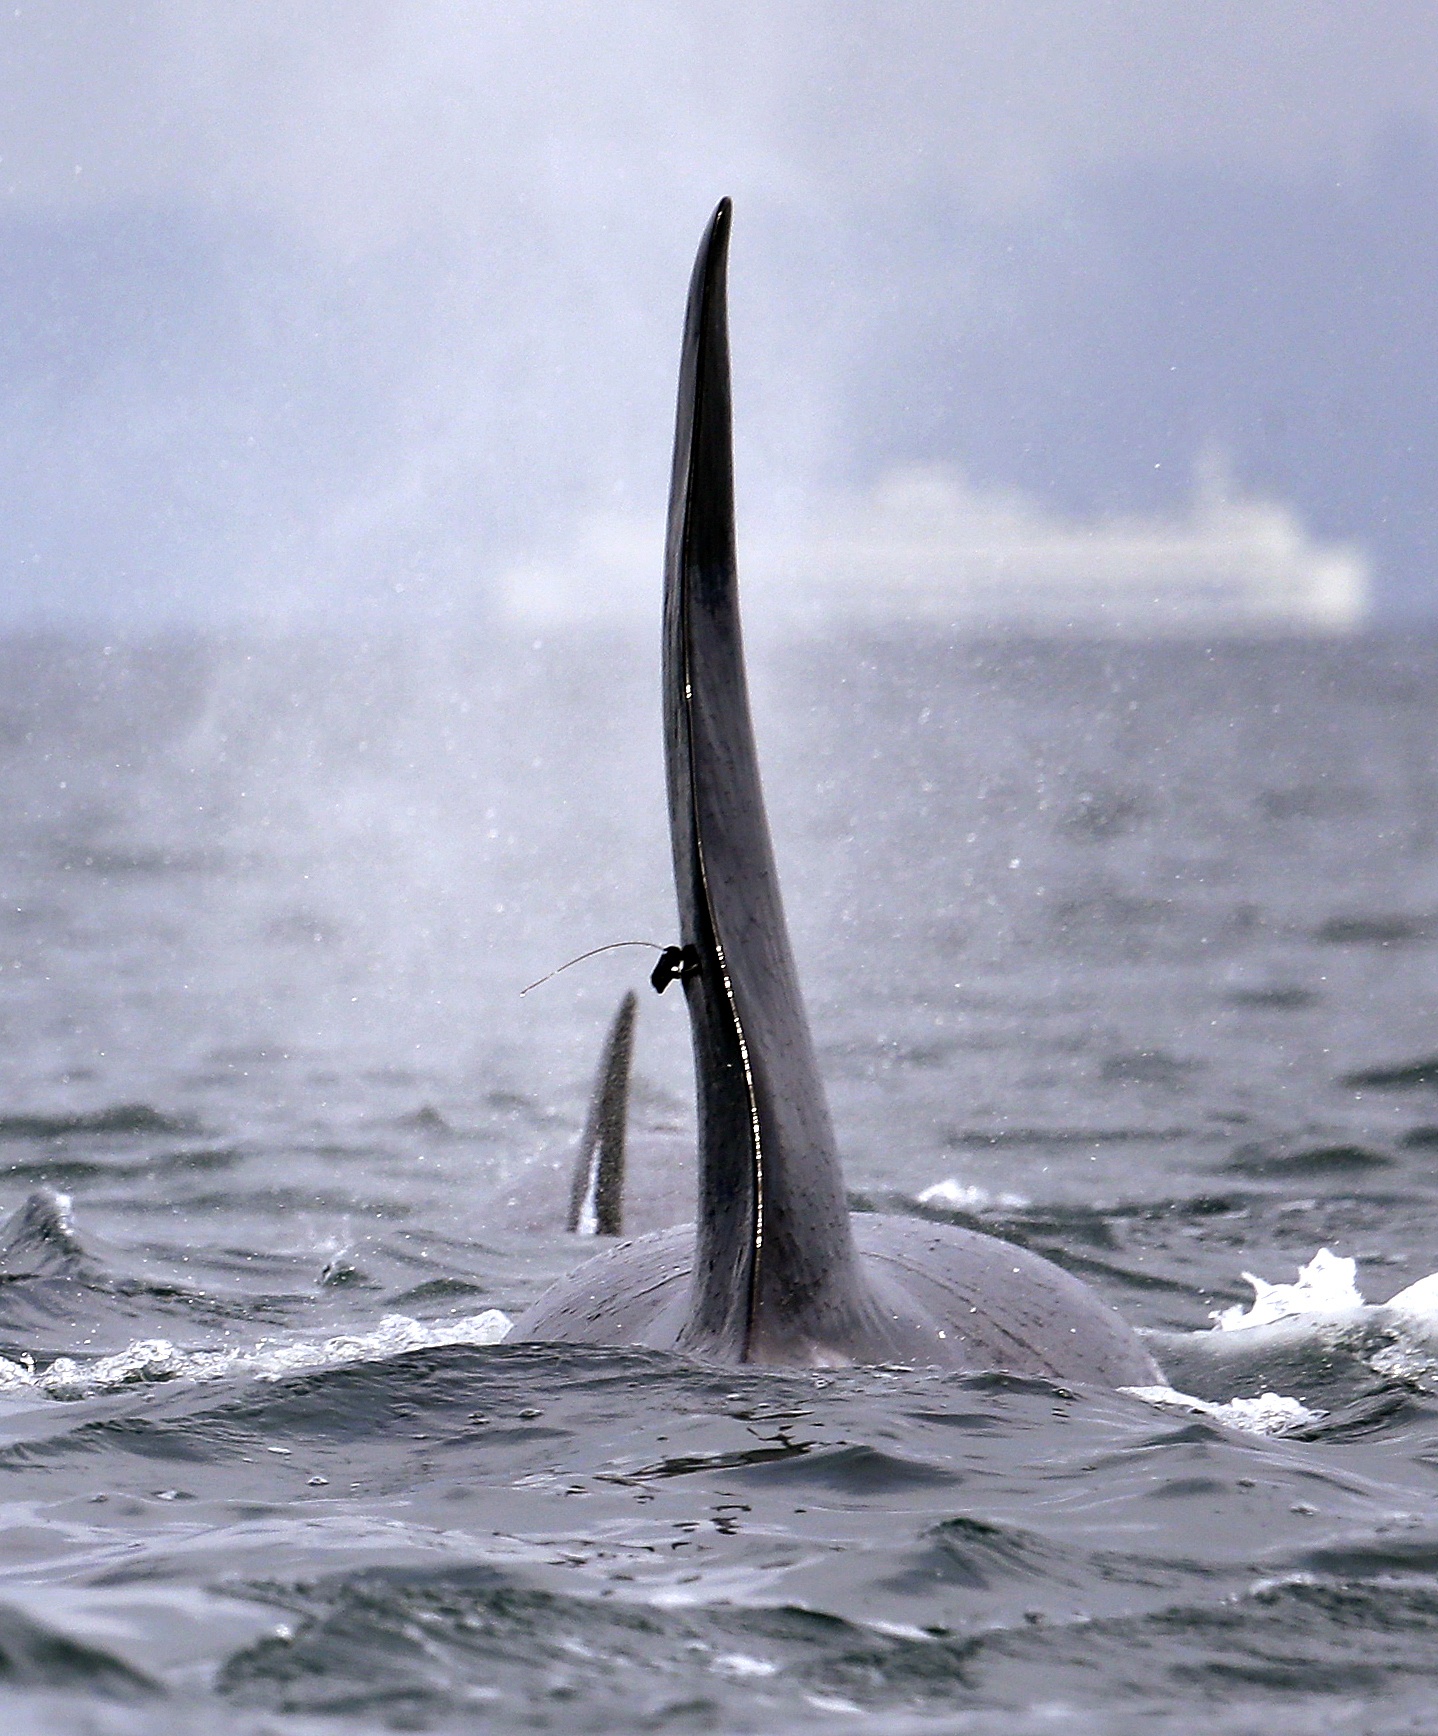 In this file photo taken Jan. 18, 2014, a satellite-linked transmitter is visible on the dorsal fin of L87, an orca from the southern resident group of killer whales, while swimming in Puget Sound west of Seattle. (Elaine Thompson/The Associated Press)